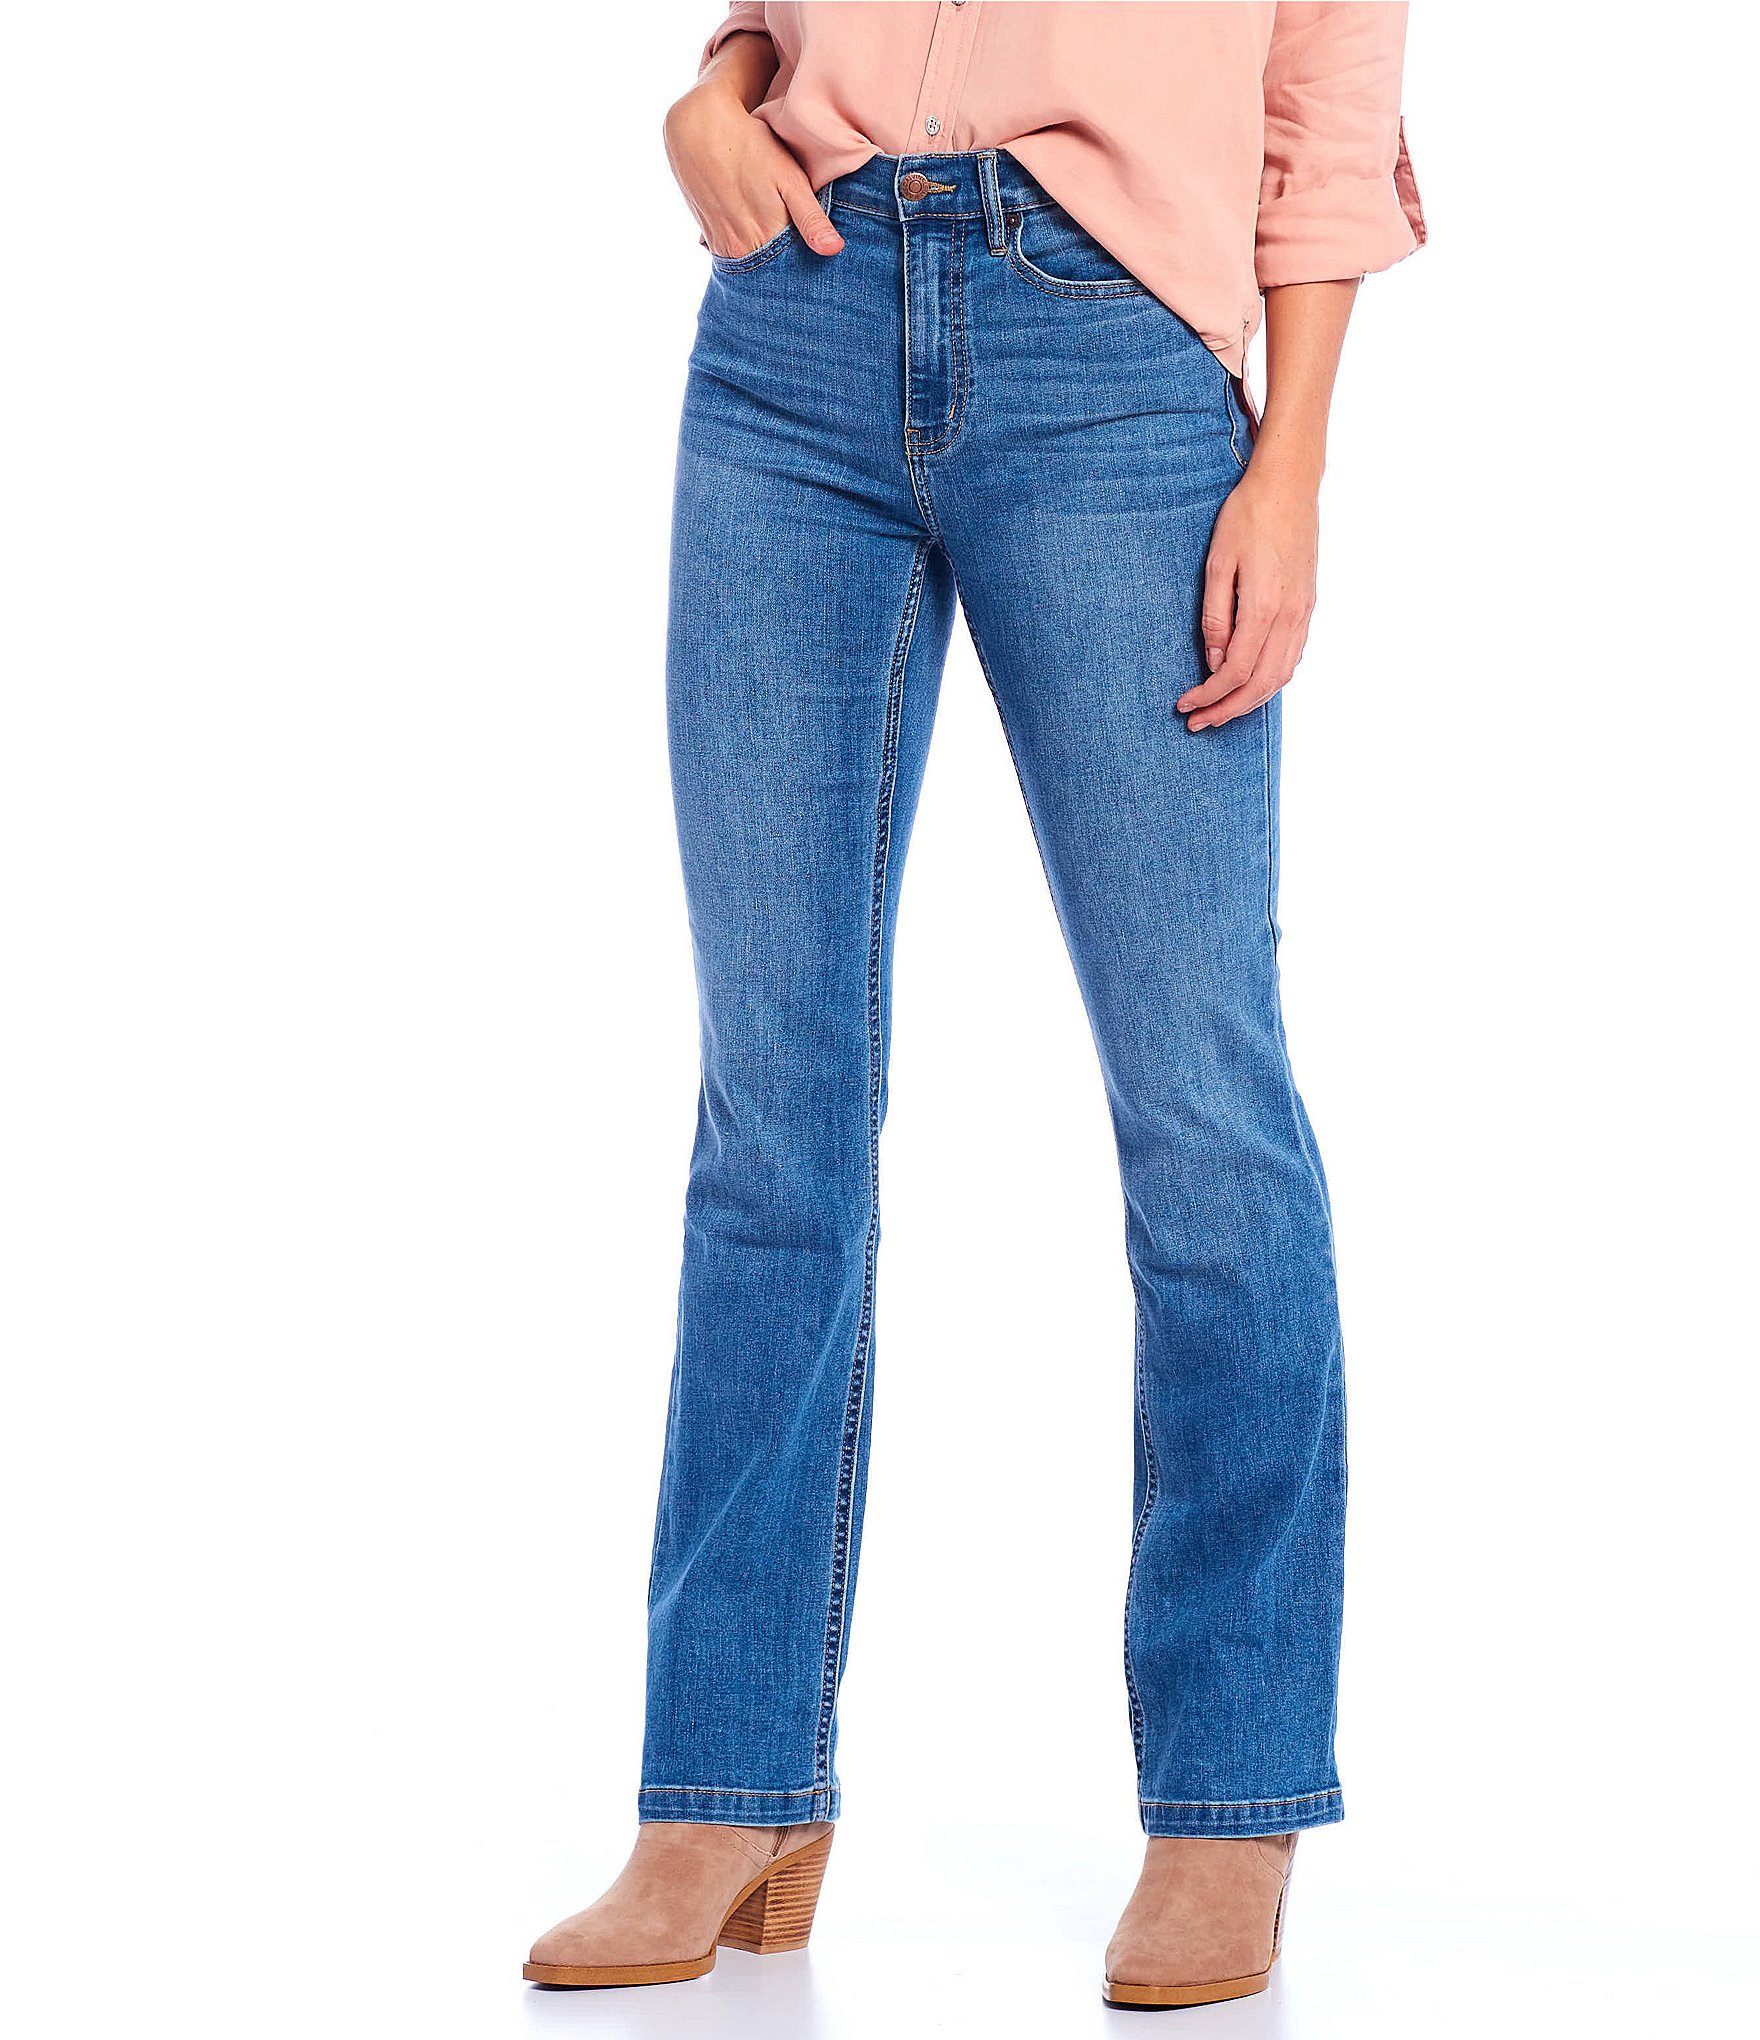 Concession Herself playground Calvin Klein Jeans High Rise Bootcut Jeans | Dillard's